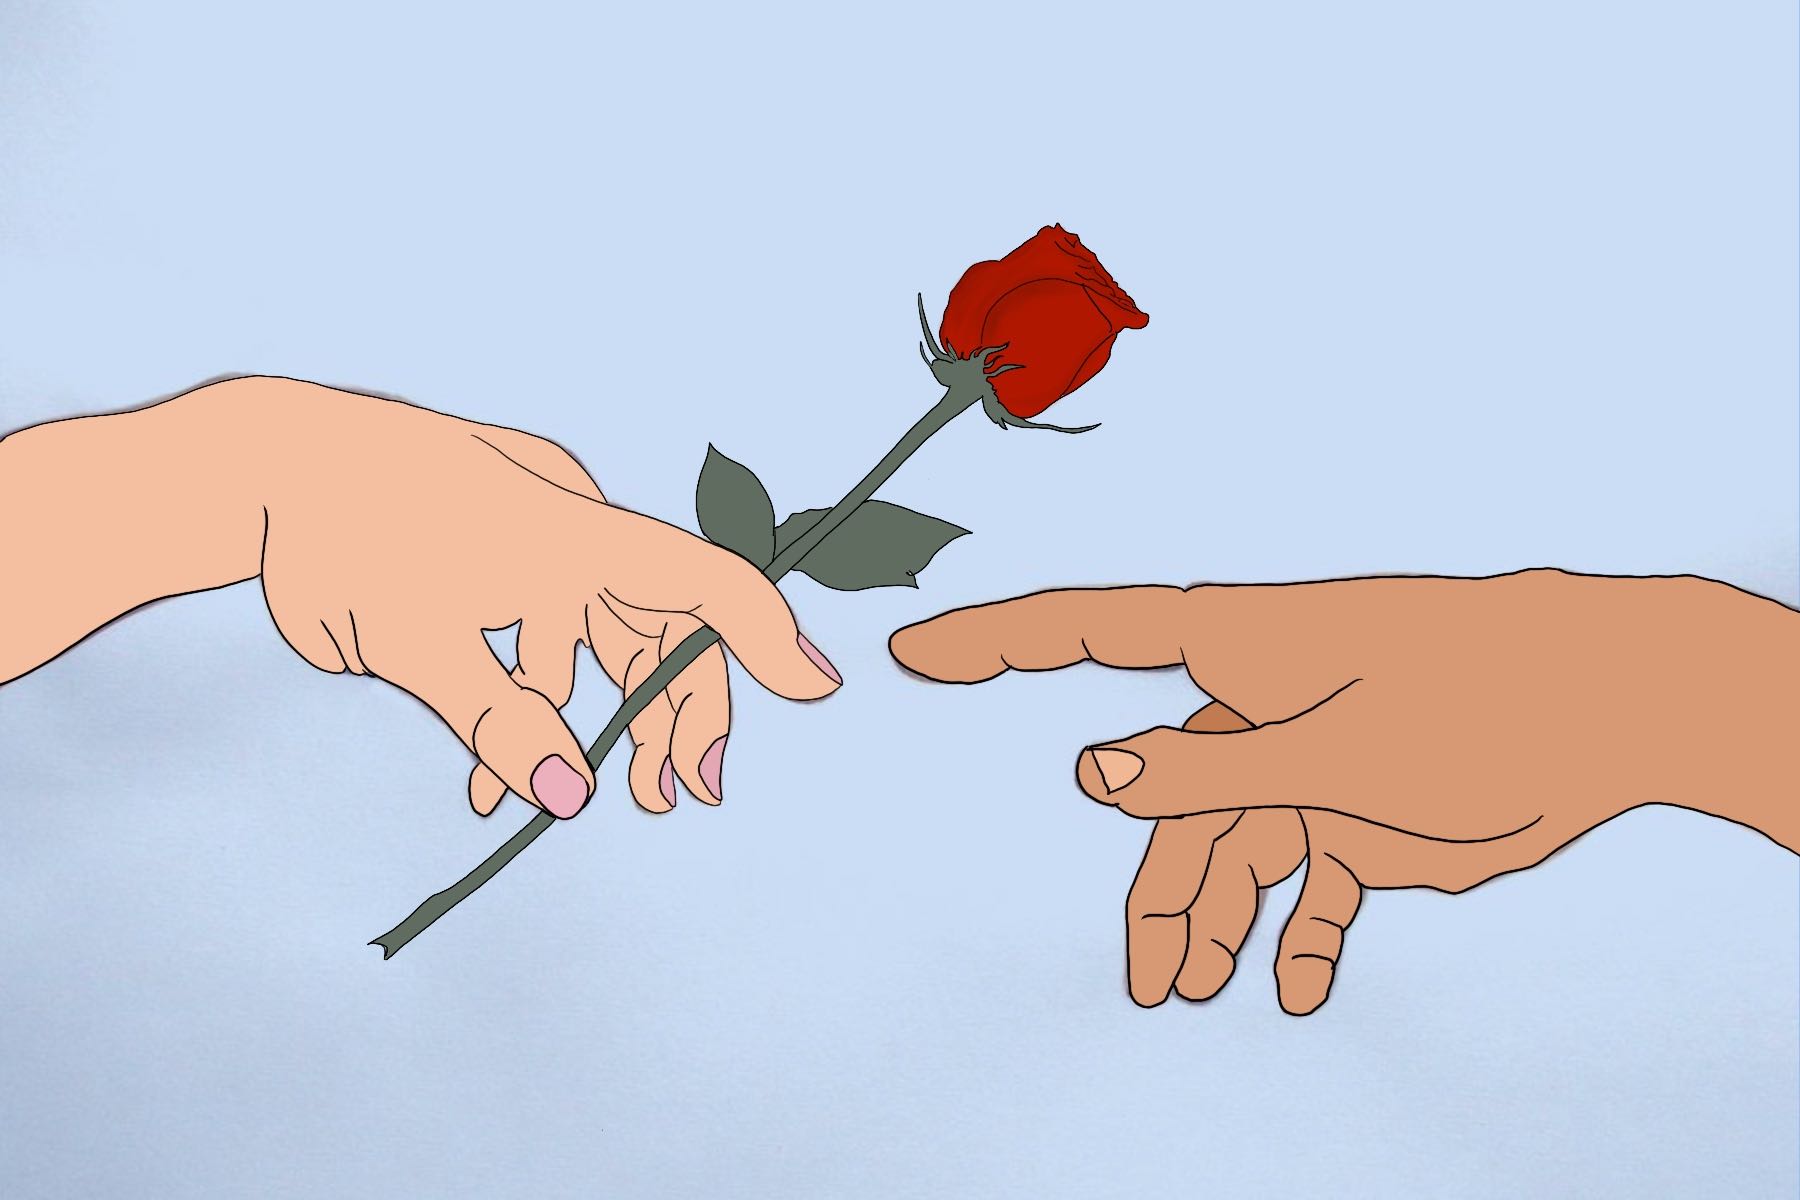 Illustration of the rose from the show The Bachelor